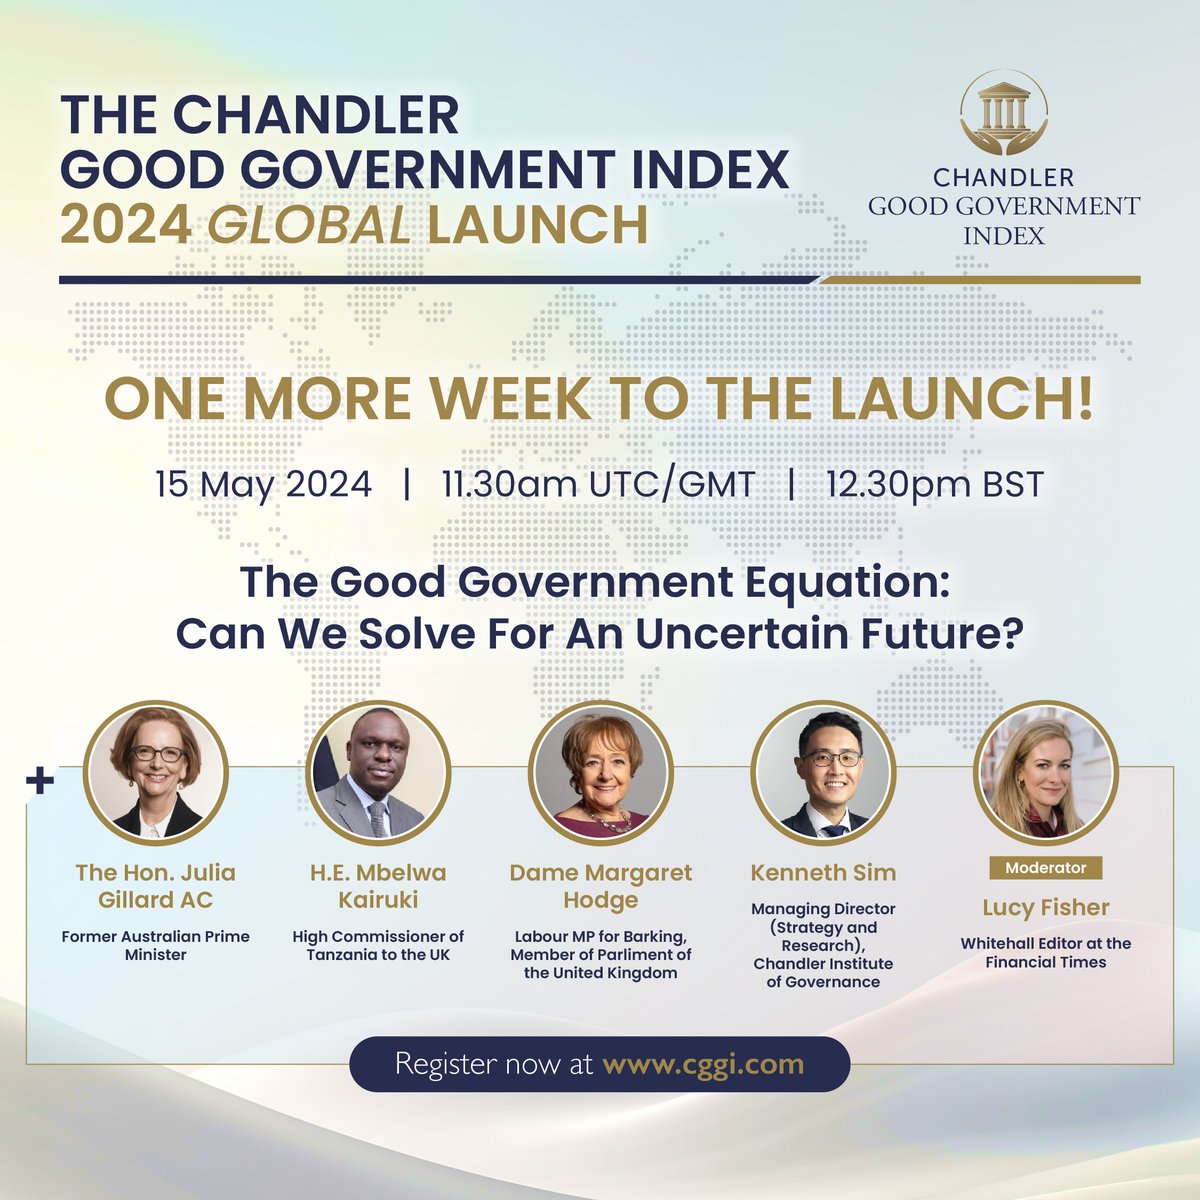 What is the winning equation for good governance? Hear from @JuliaGillard @MbelwaK @margarethodge and @LOS_Fisher as they discuss what good governance means in the current day and age. Register to join us online or in-person at CGGI.com #cggi2024